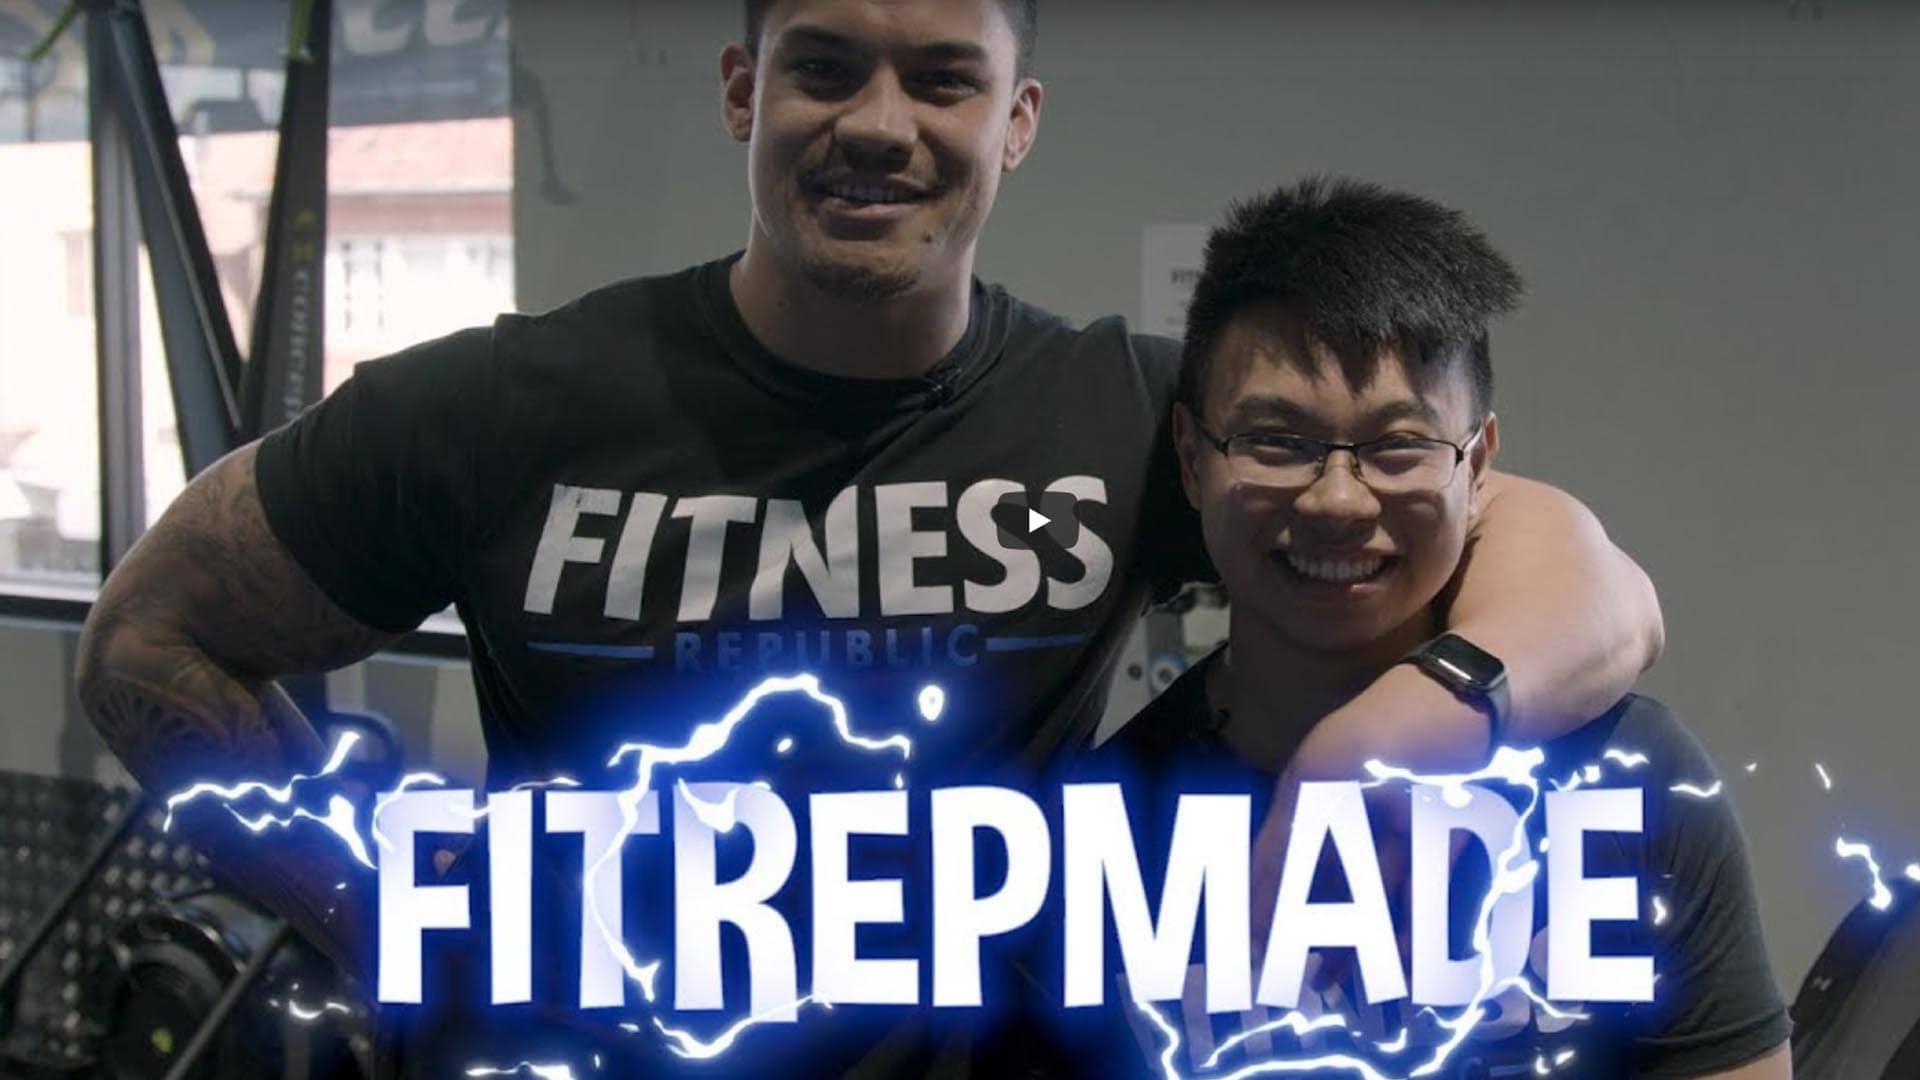 Dylan's Transformation - FITREMADE 12 fitness republic video series online